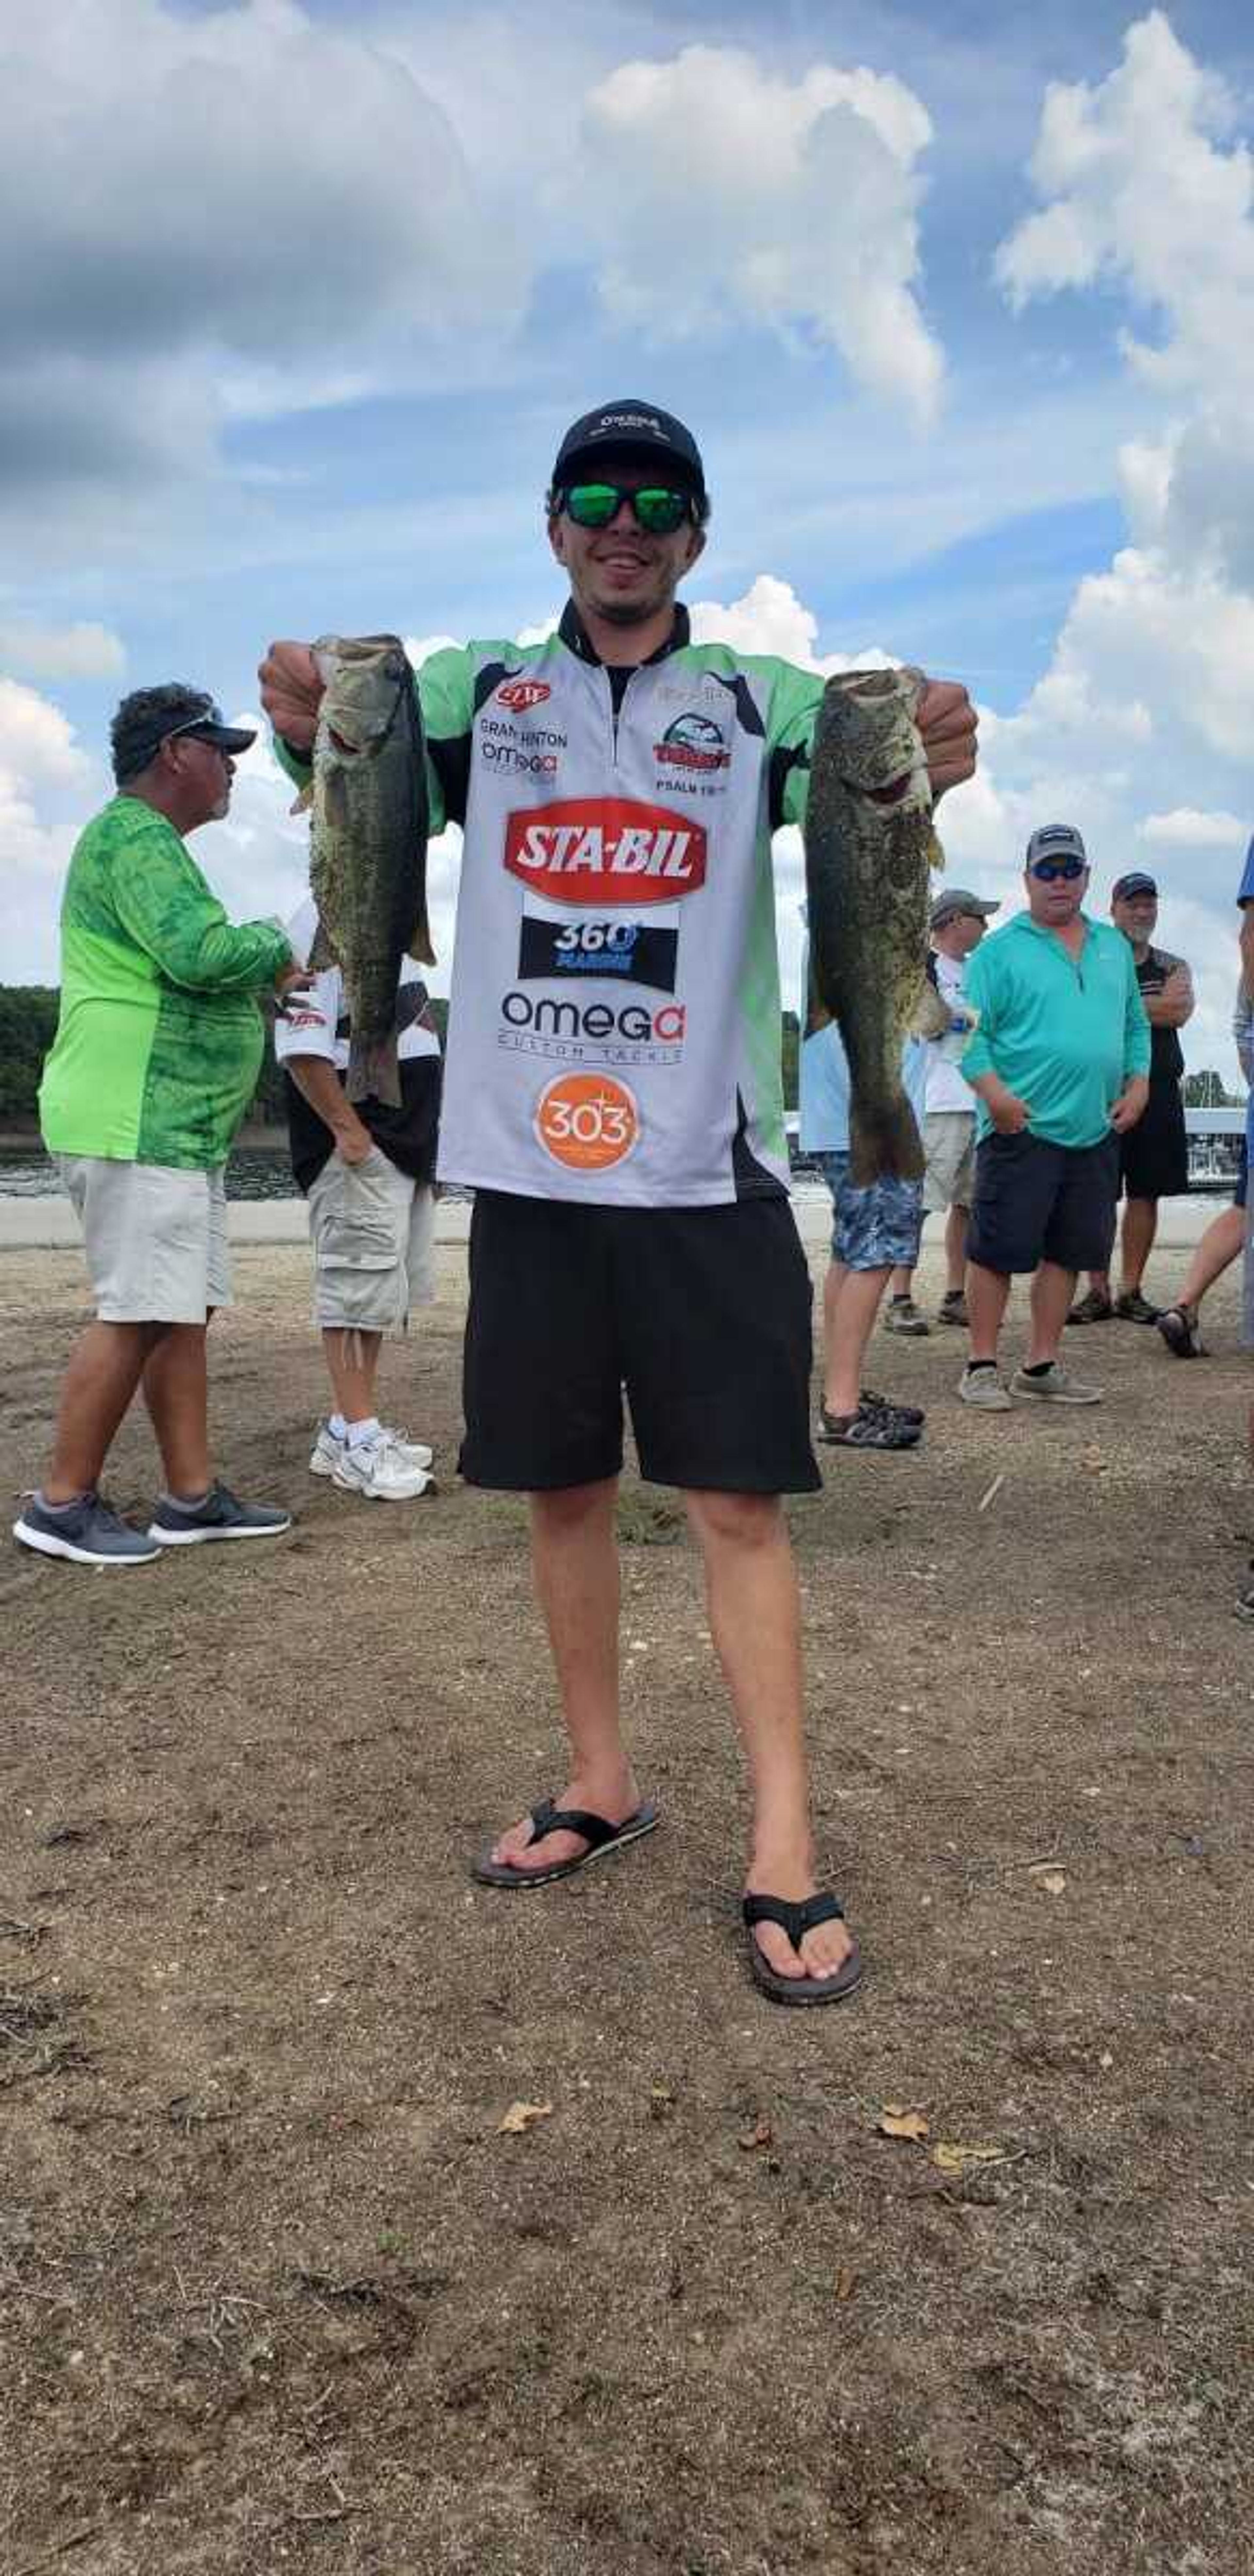 Grant Hinton poses with two bass after a competition at Truman Lake in Warsaw, MO in August 2018.